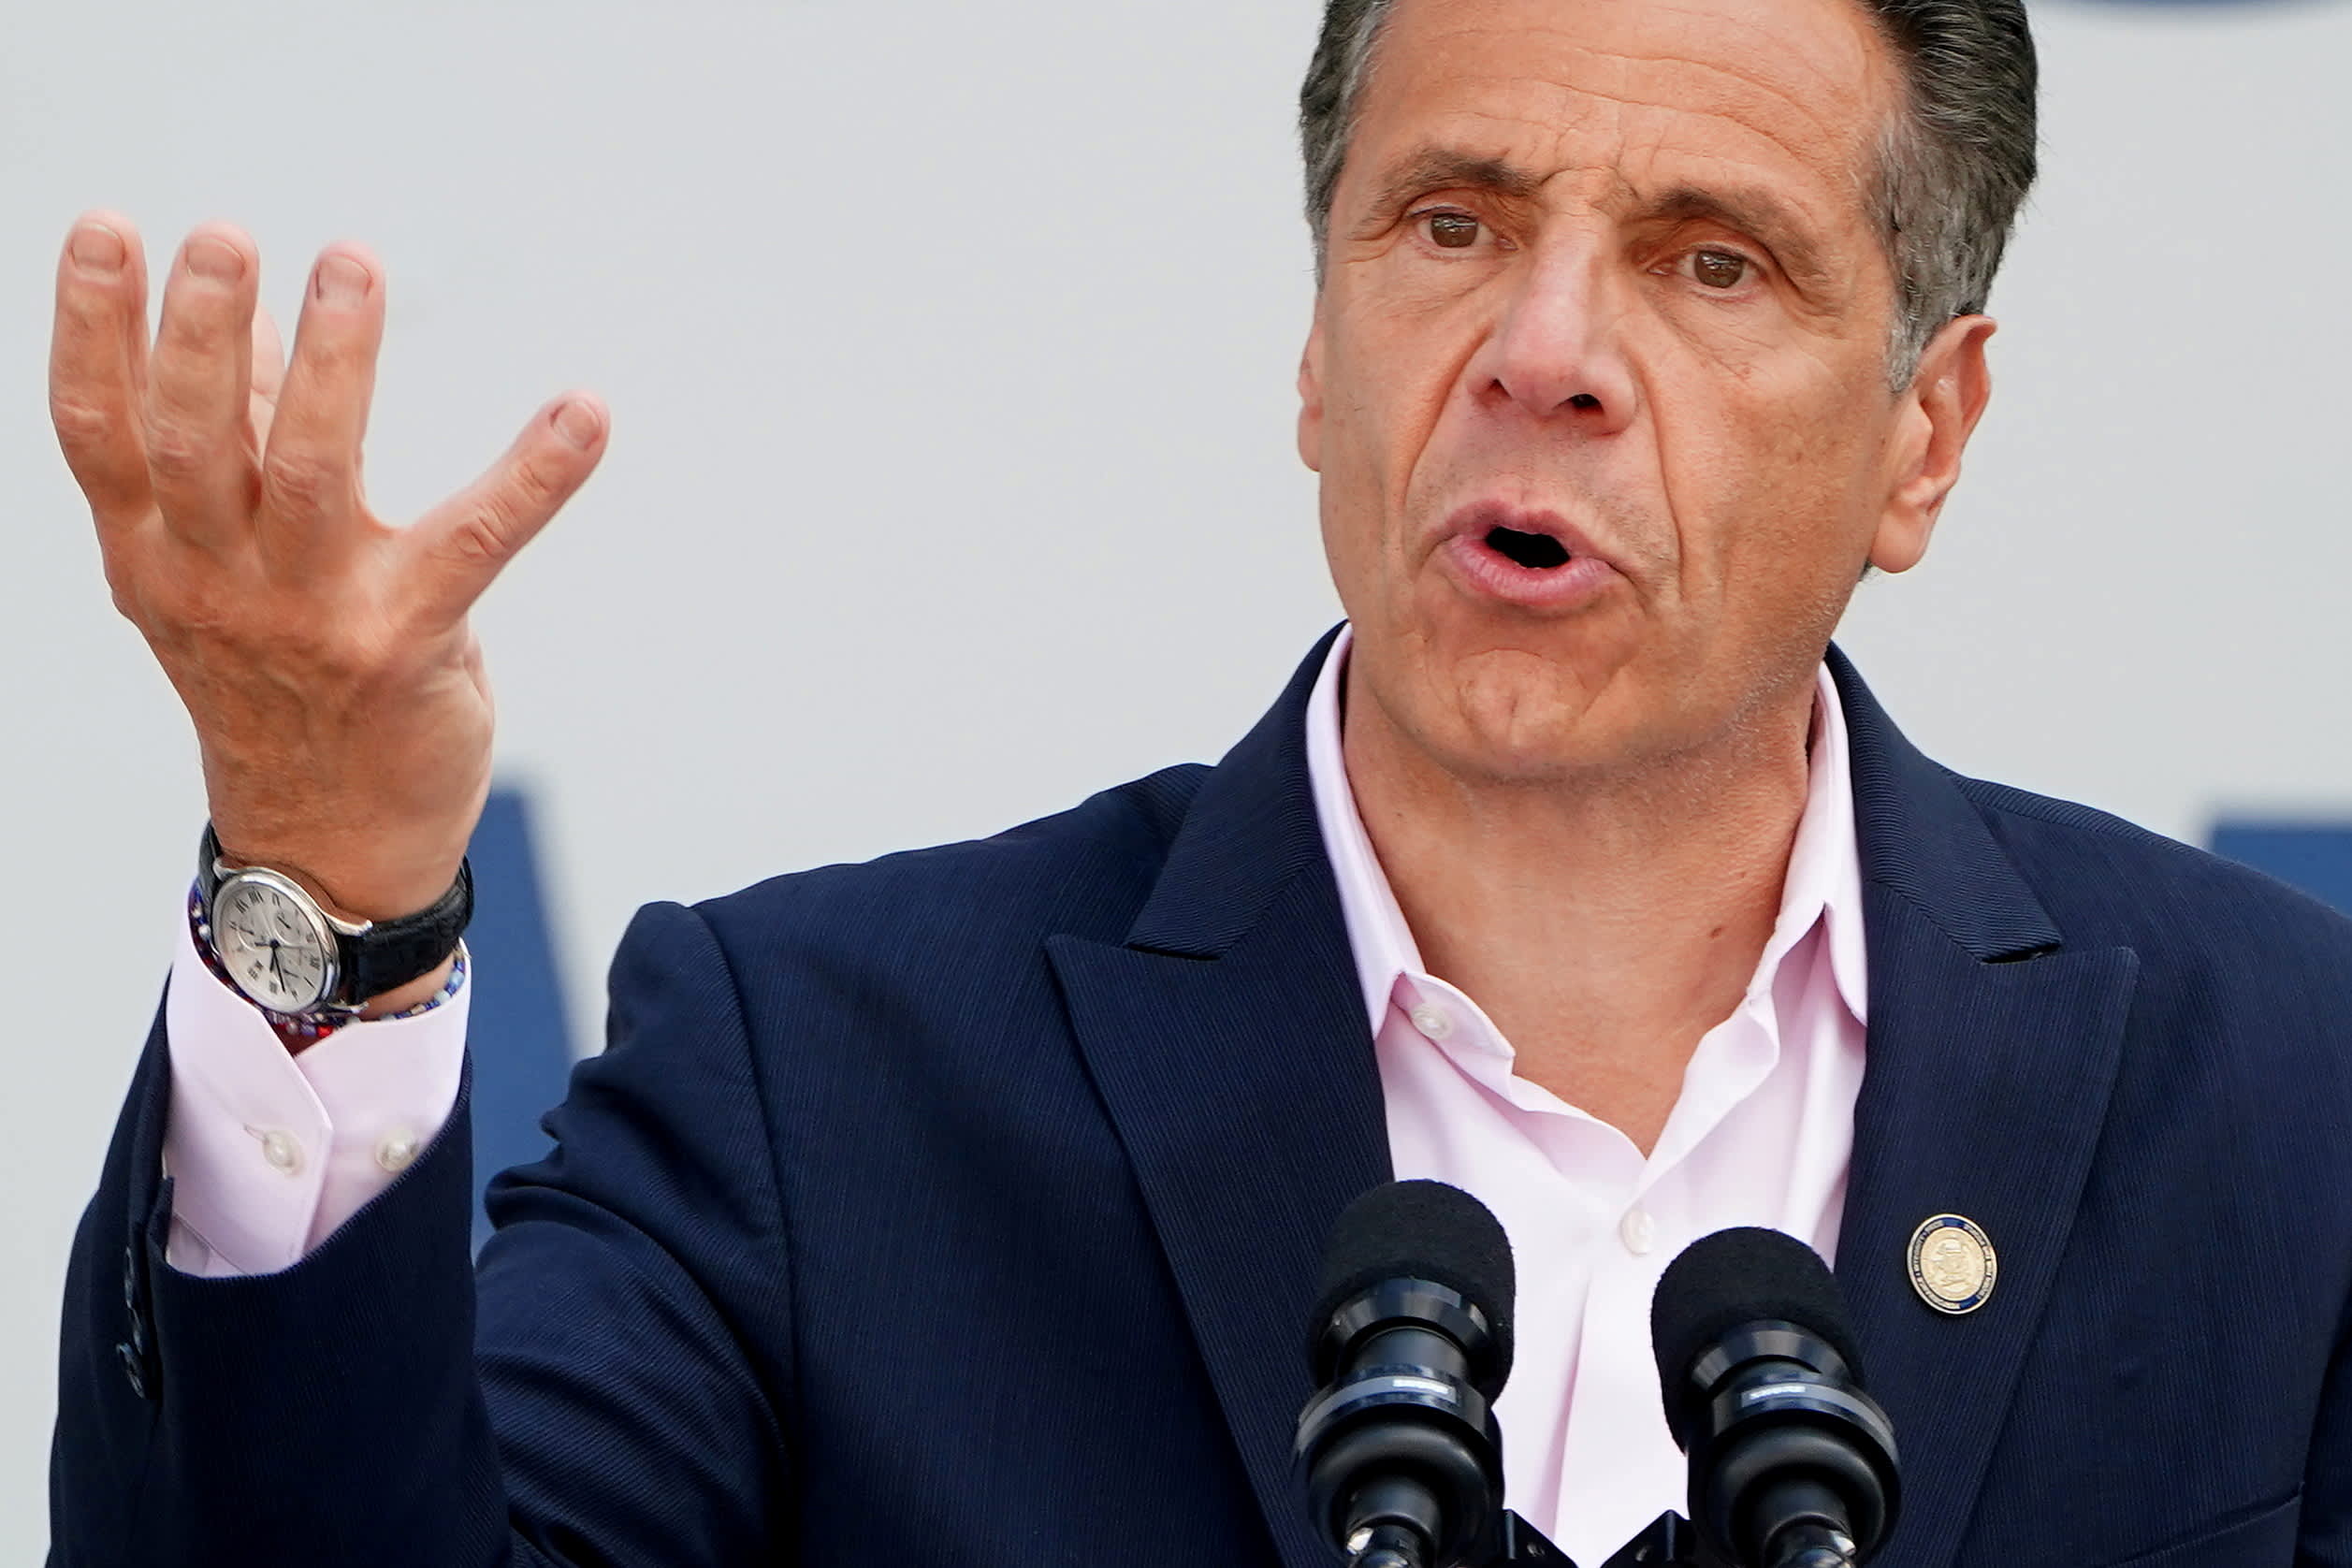 Executive assistant who accused New York Gov. Cuomo of groping speaks publicly